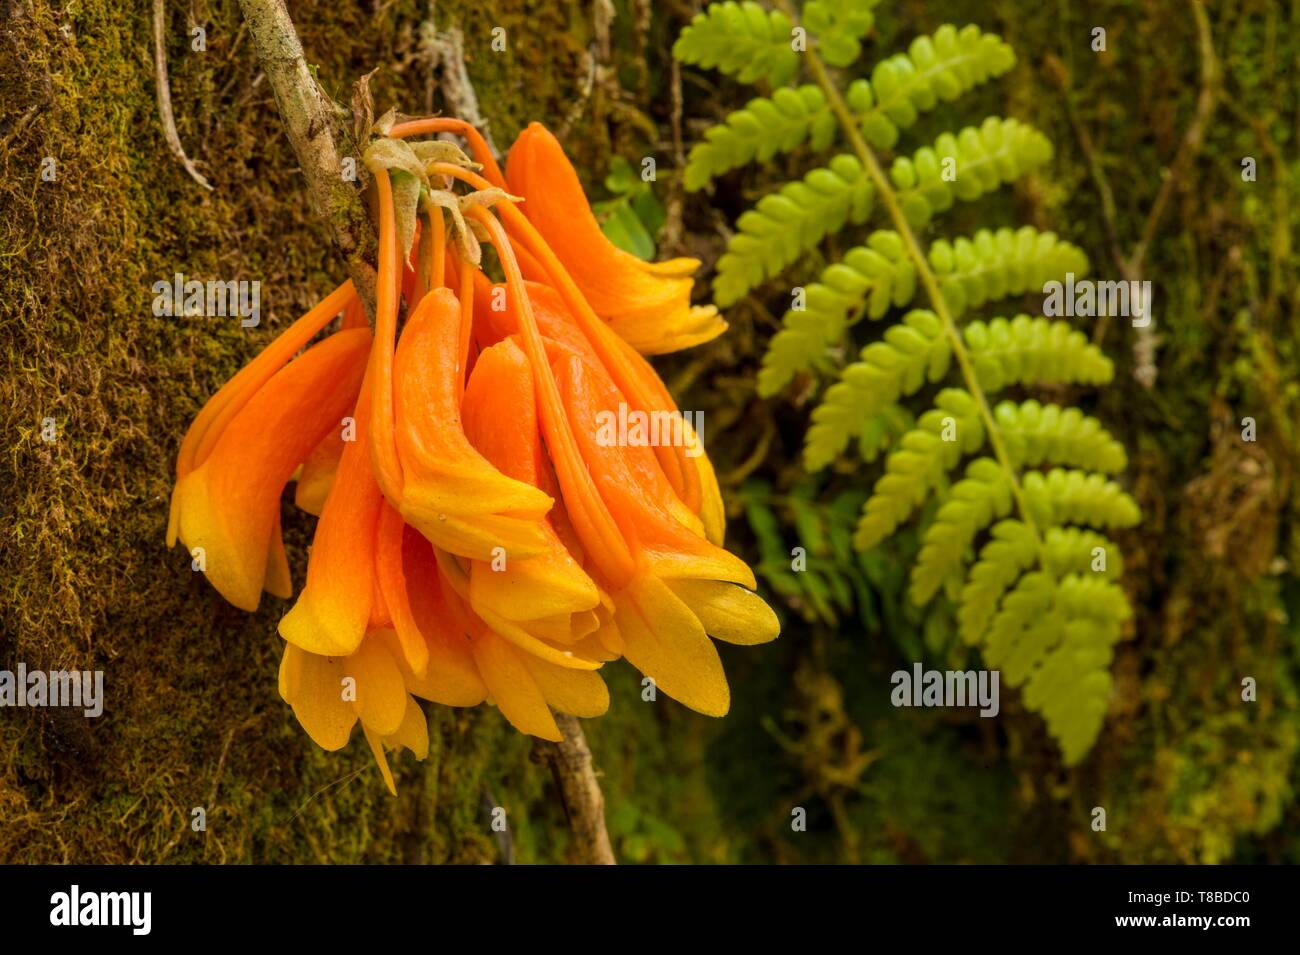 Papua New Guinea, Western Highlands Province, Wahgi Valley, Mount Hagen Region, orchid Stock Photo